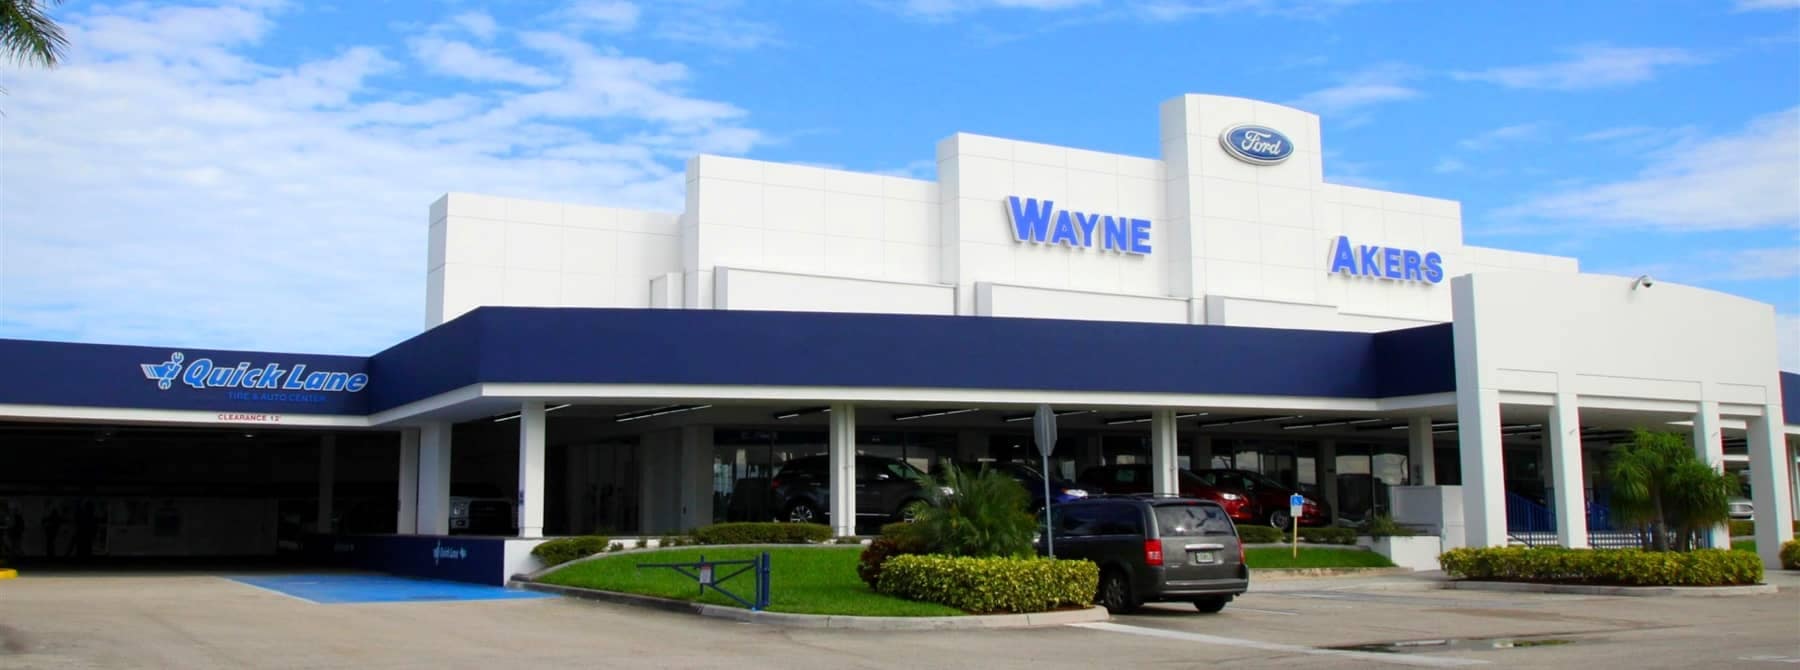 Wayne Akers Ford Storefront